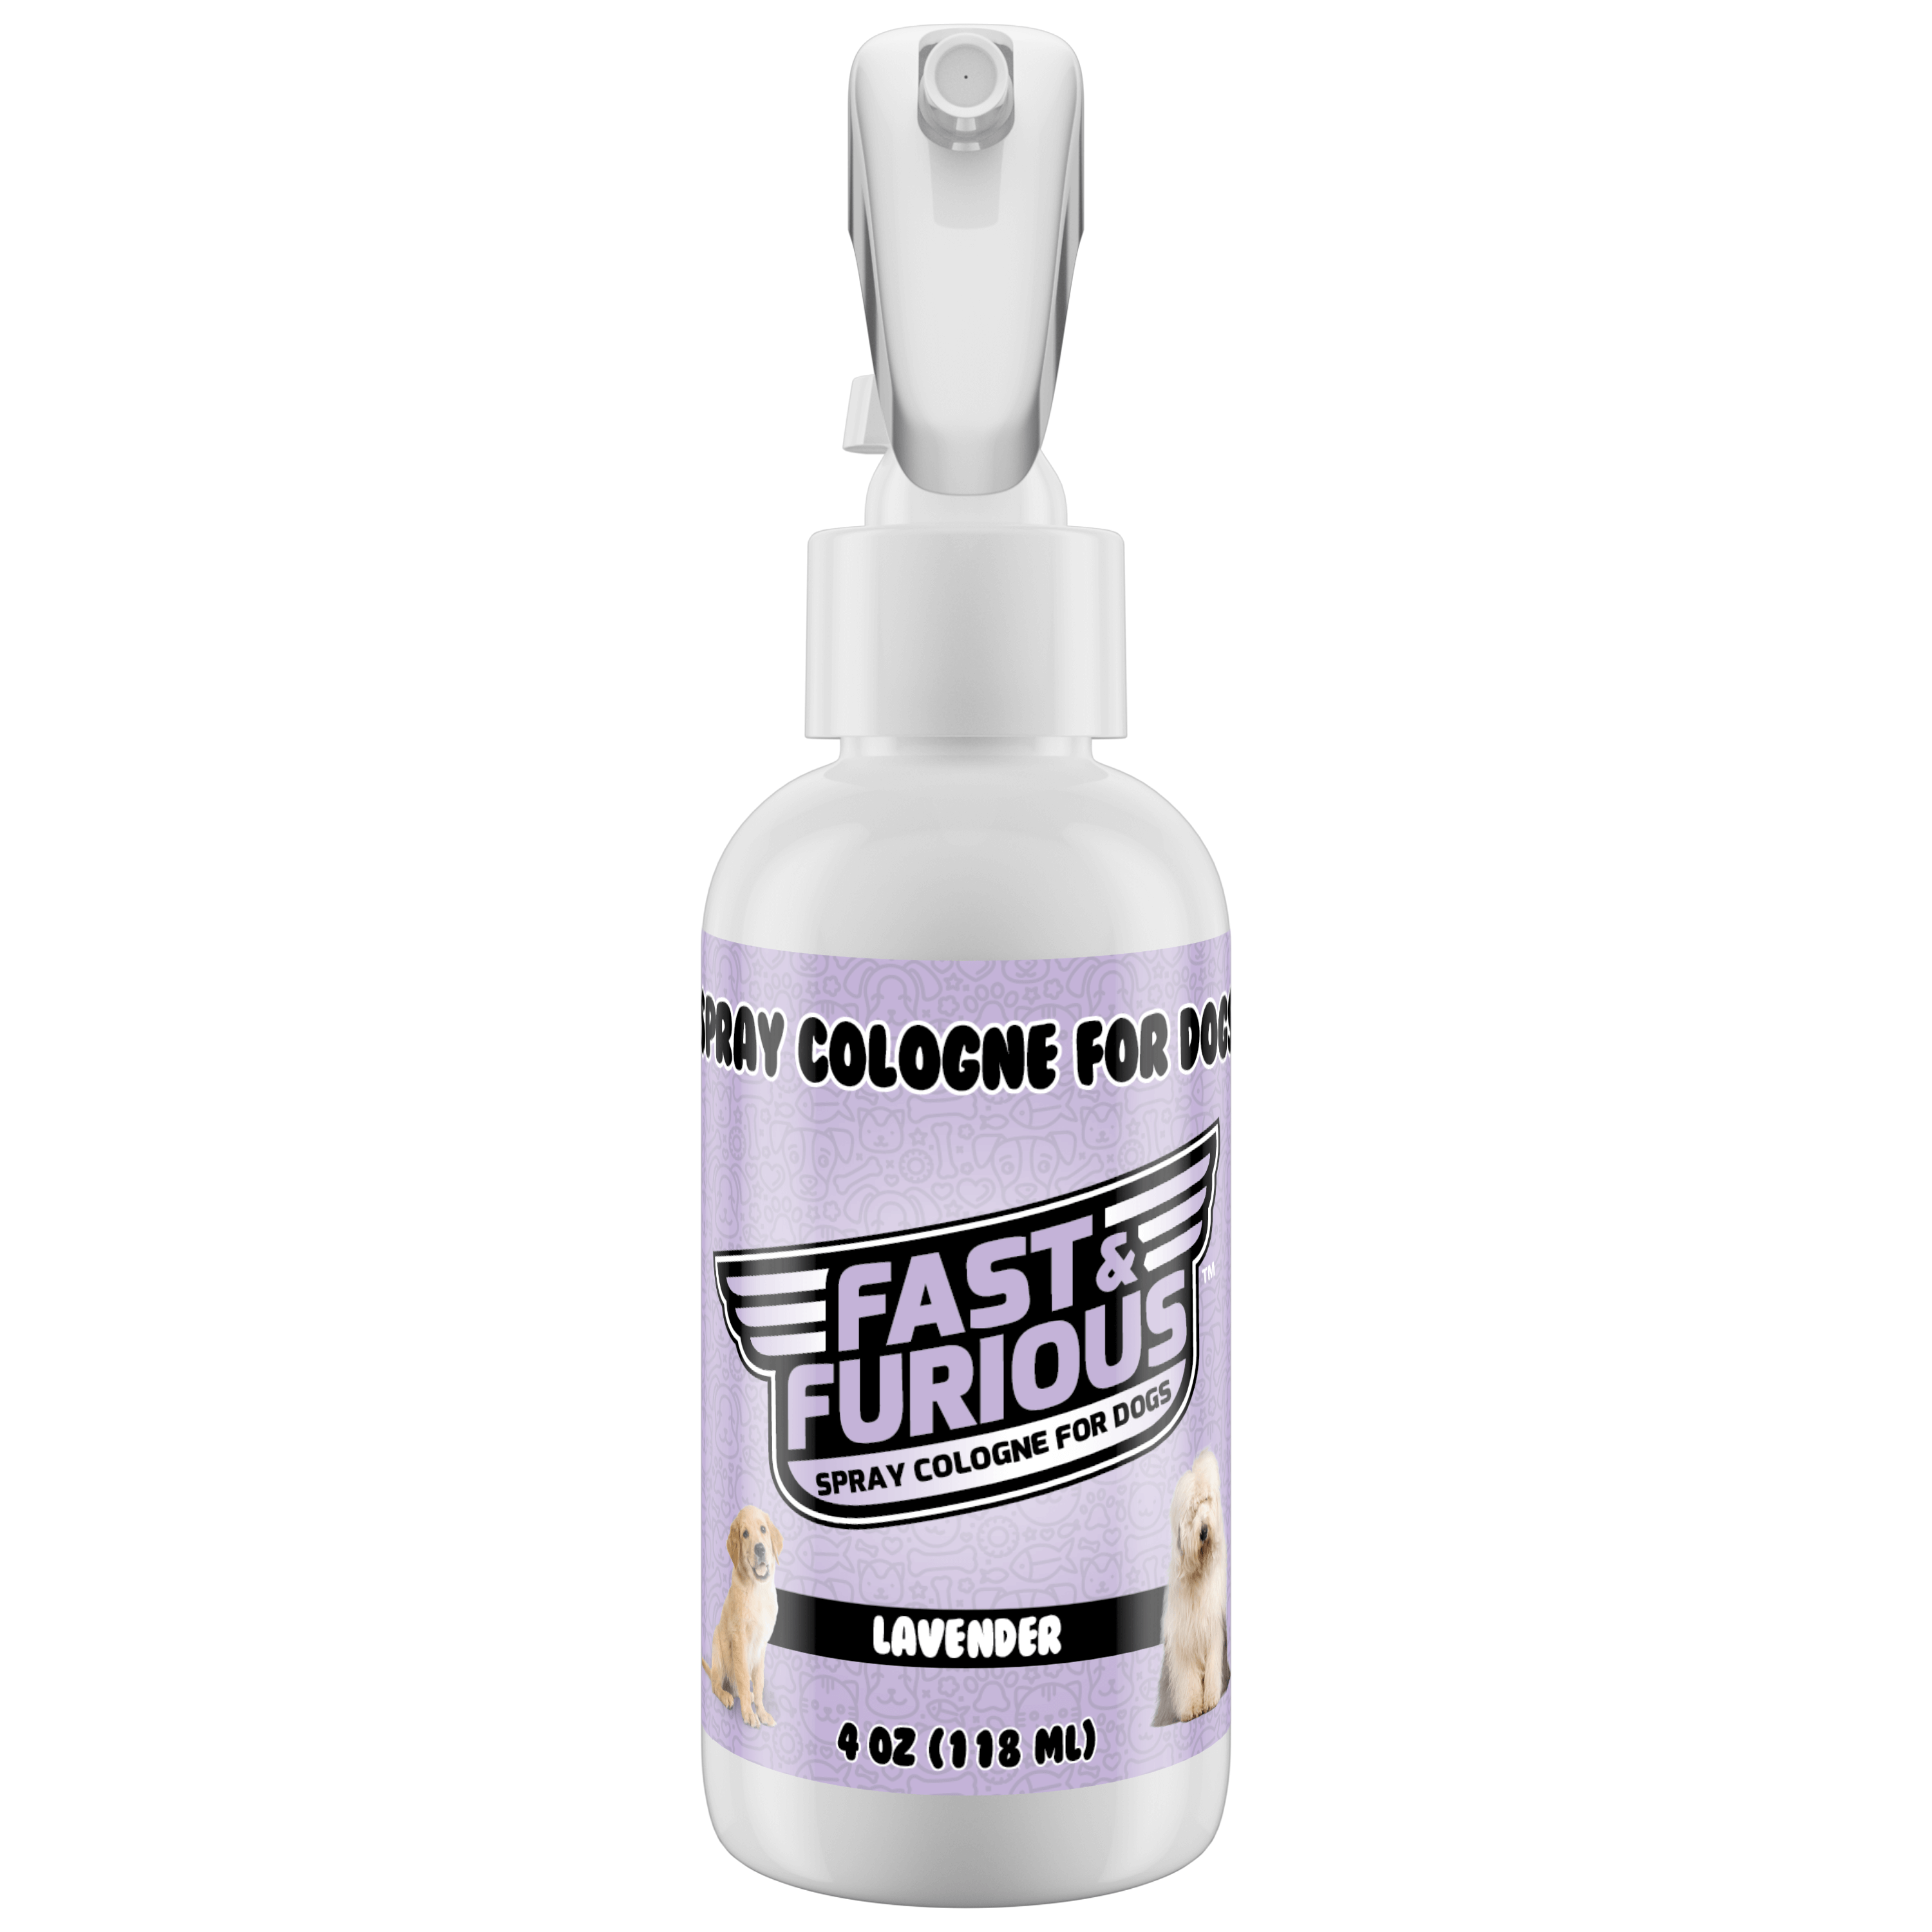 Fast & Furious Spray Cologne For Dogs